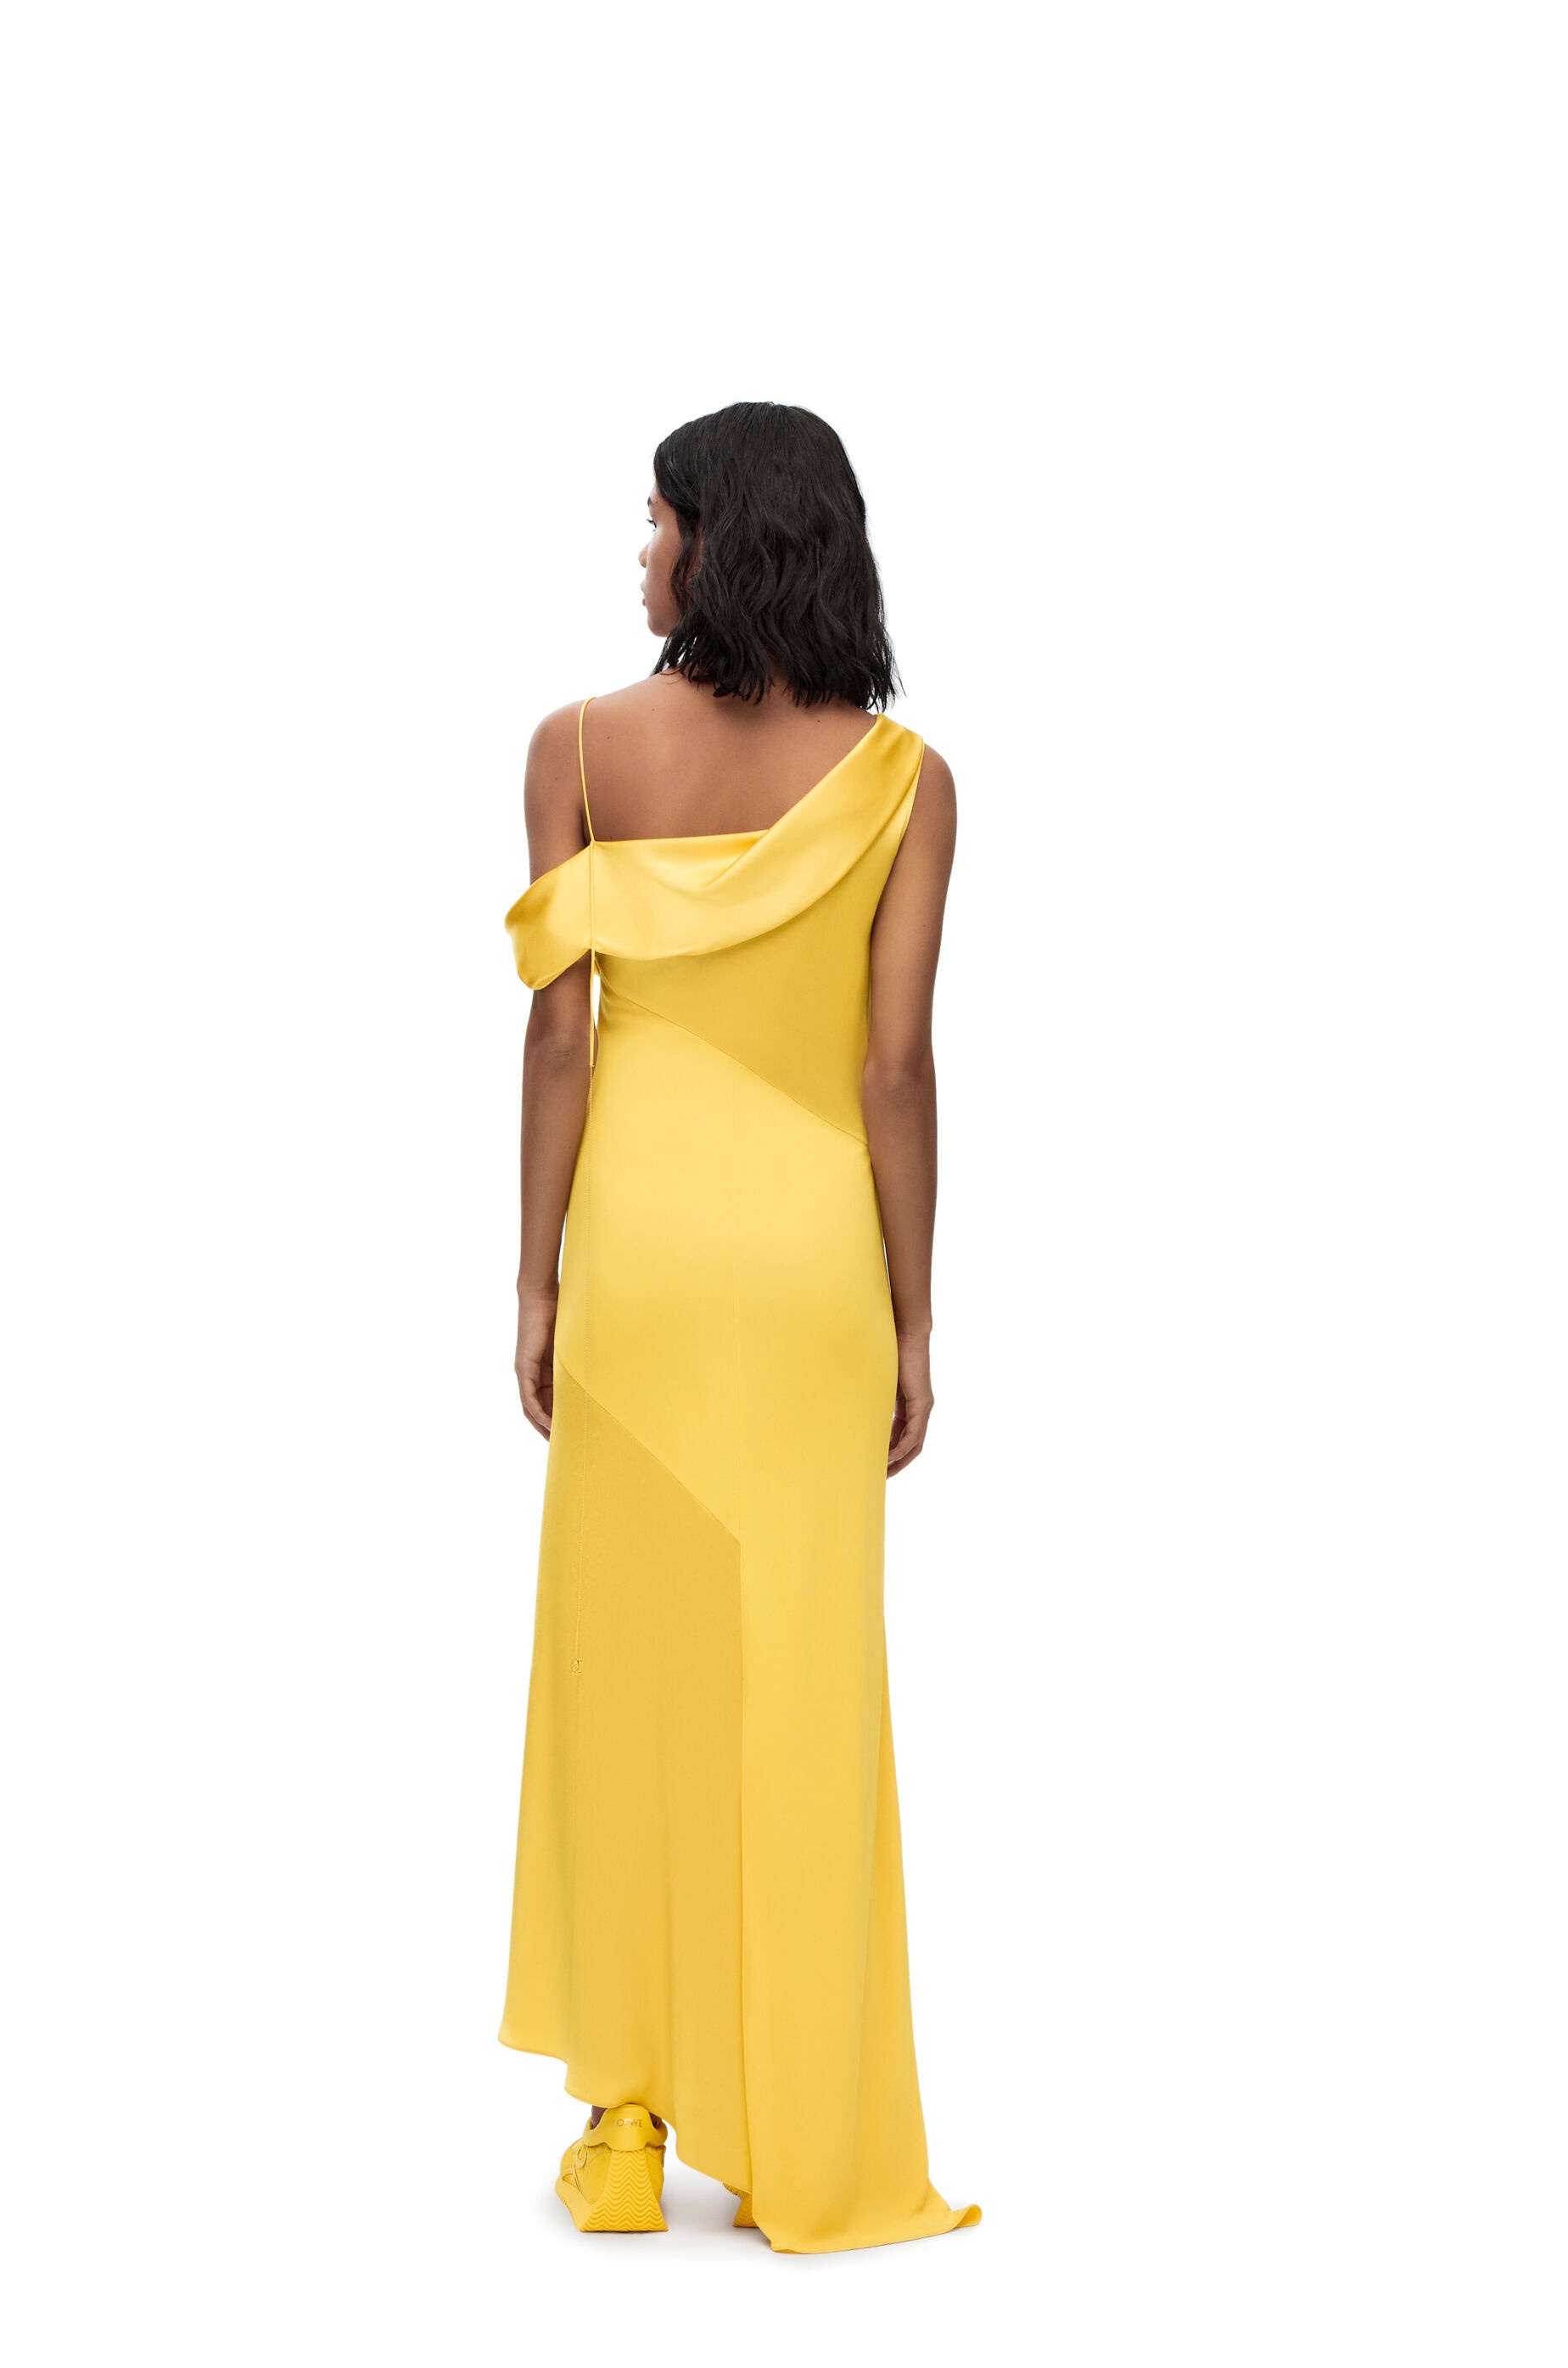 Draped dress in satin and crepe jersey - 3